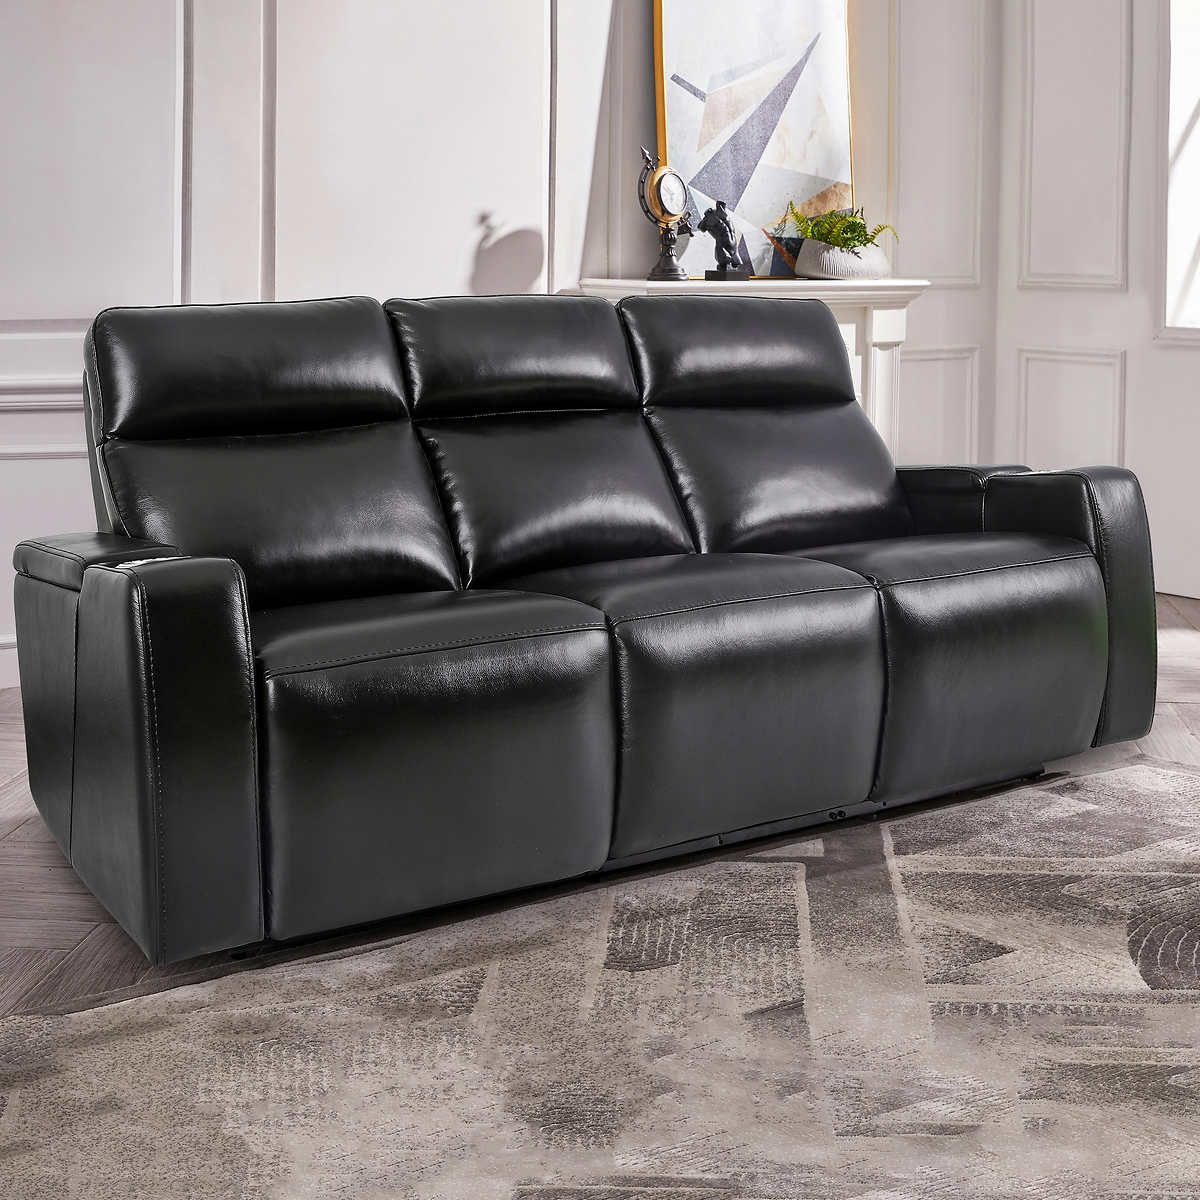 Renaissance Leather Power Reclining, Grey Reclining Sofa With Drop Down Table